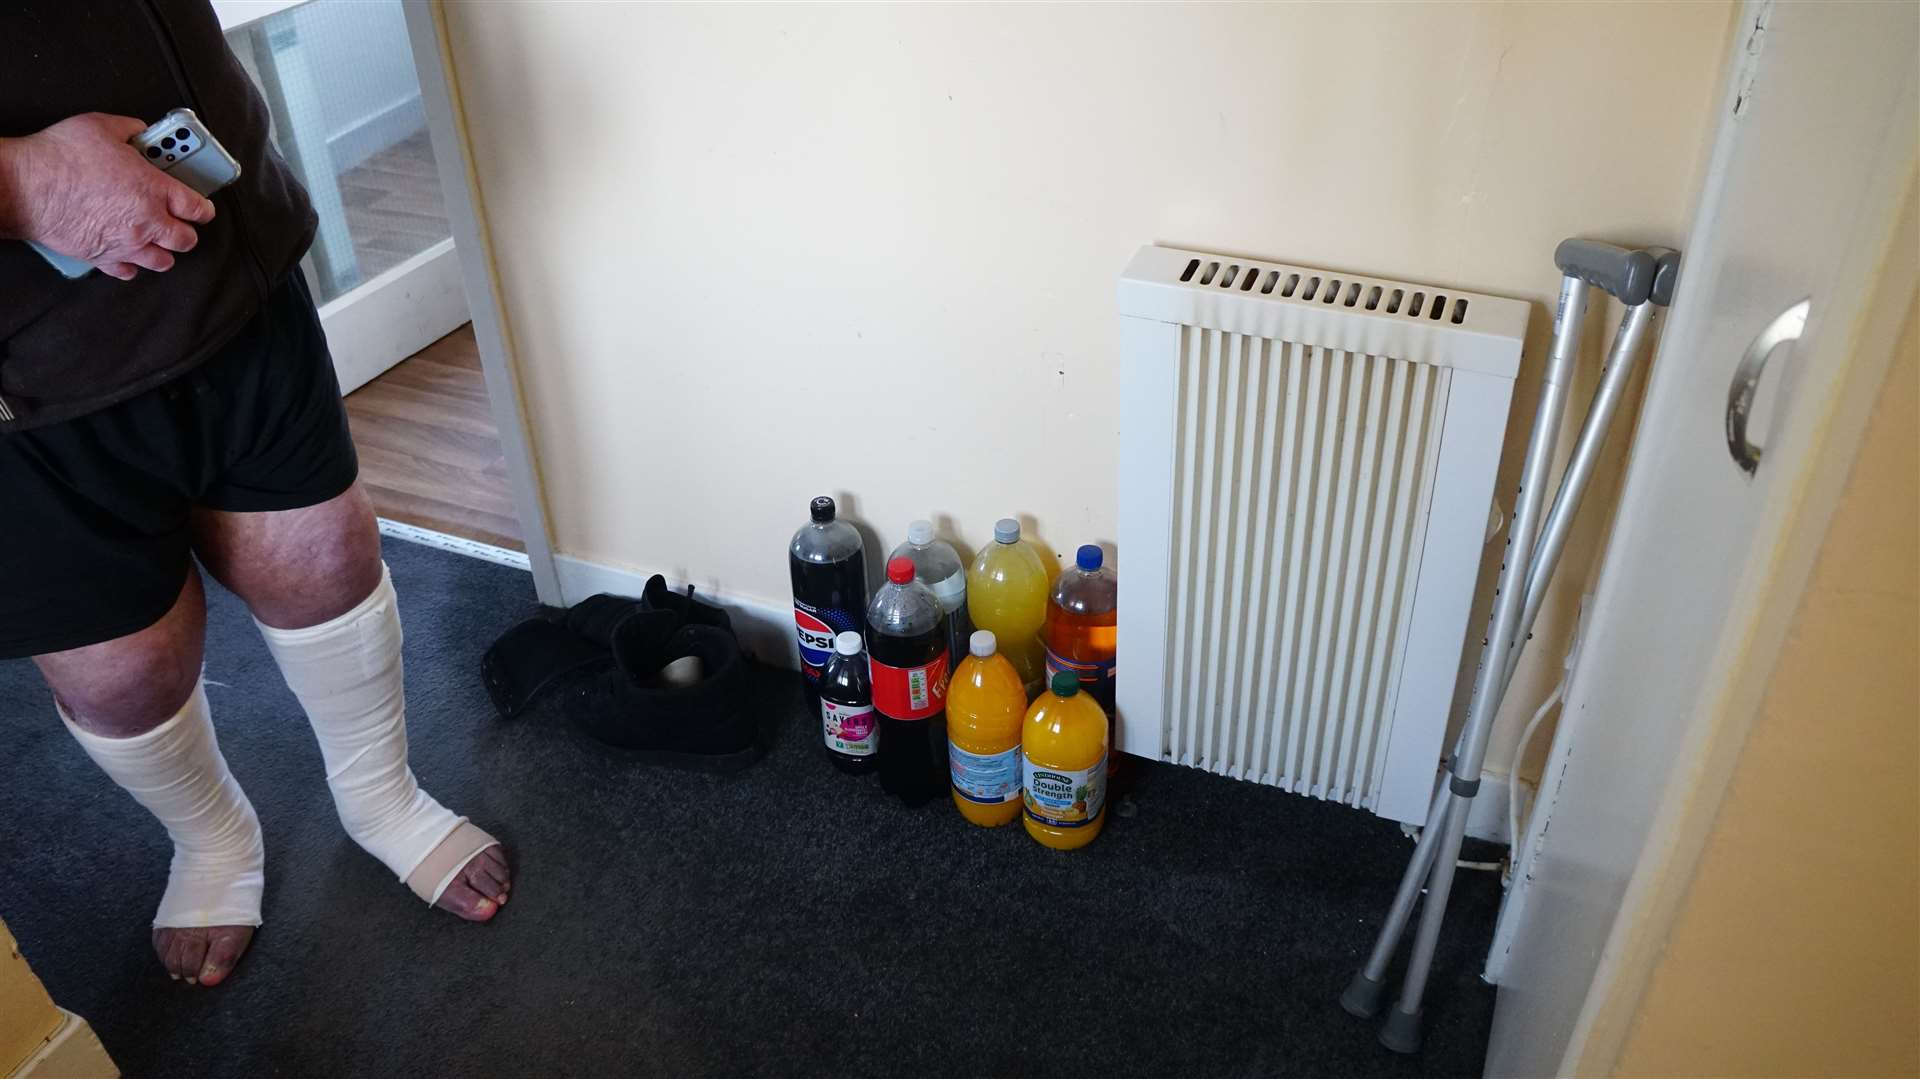 The heating is ineffective said the 71-year-old. Picture: DGS